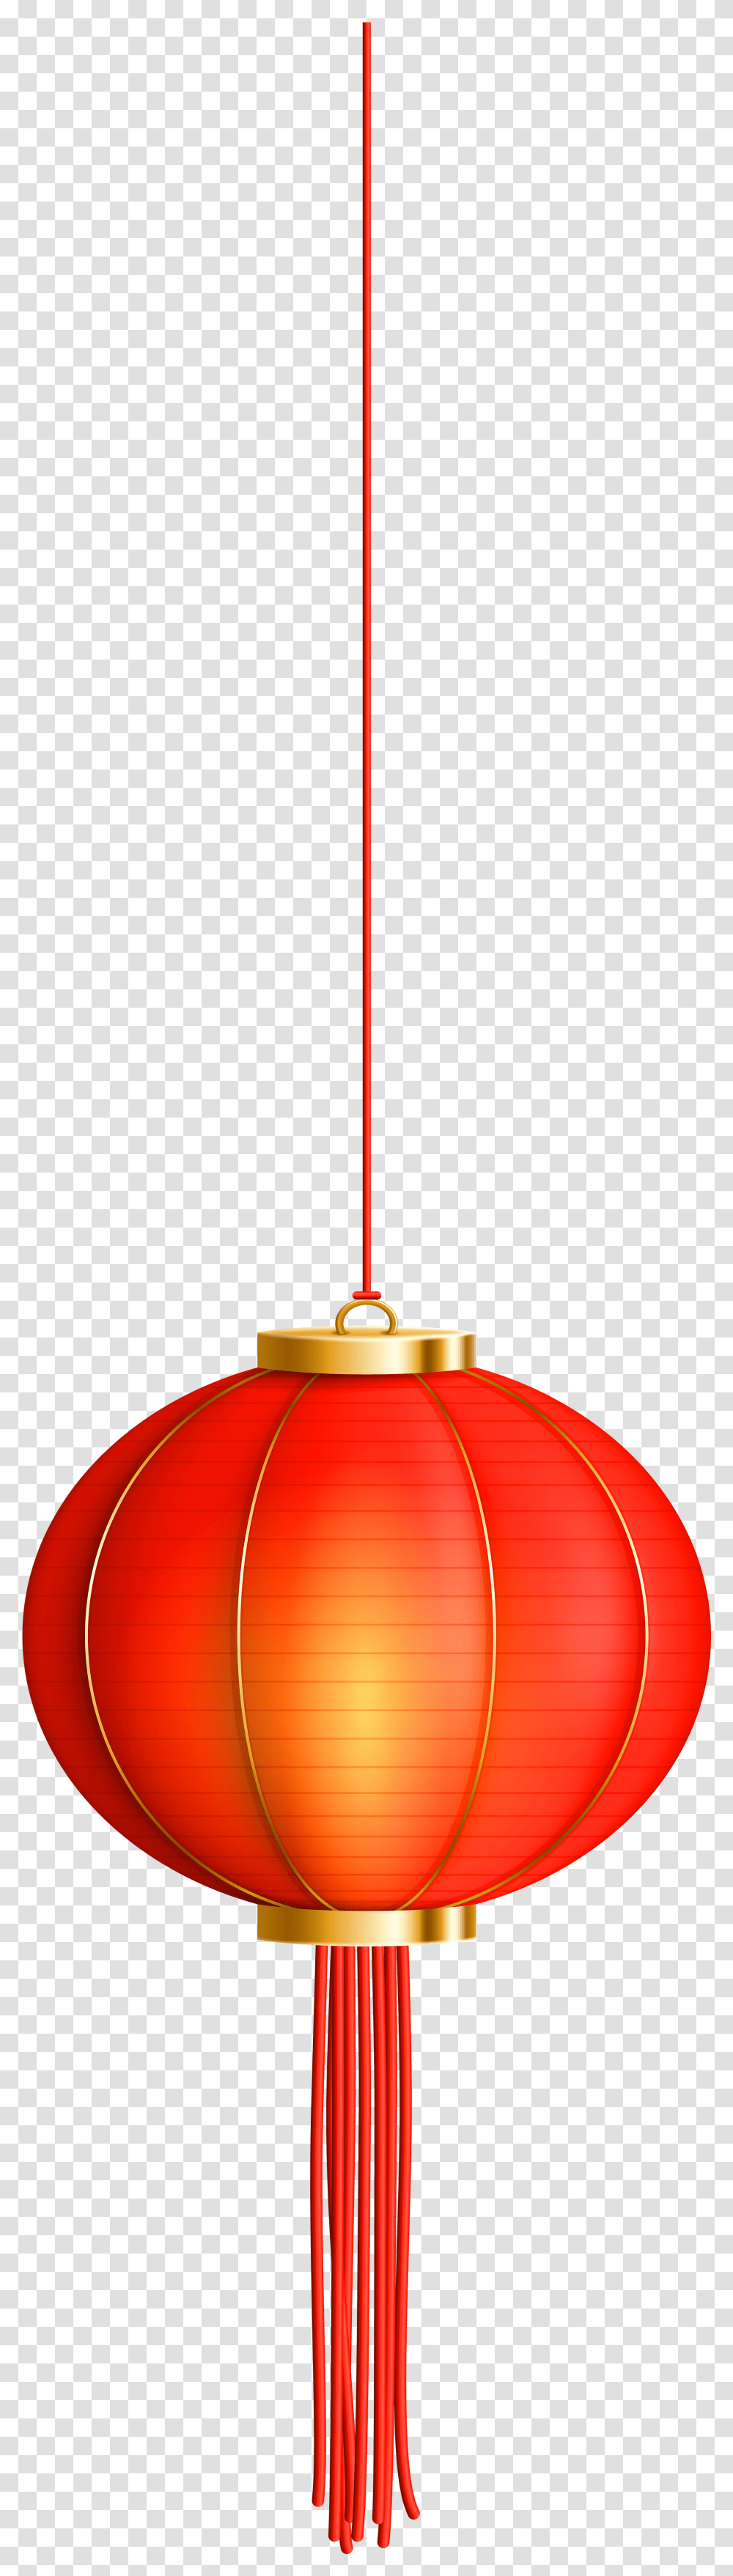 Chinese Lantern Clipart Best, Lamp, Lampshade Transparent Png